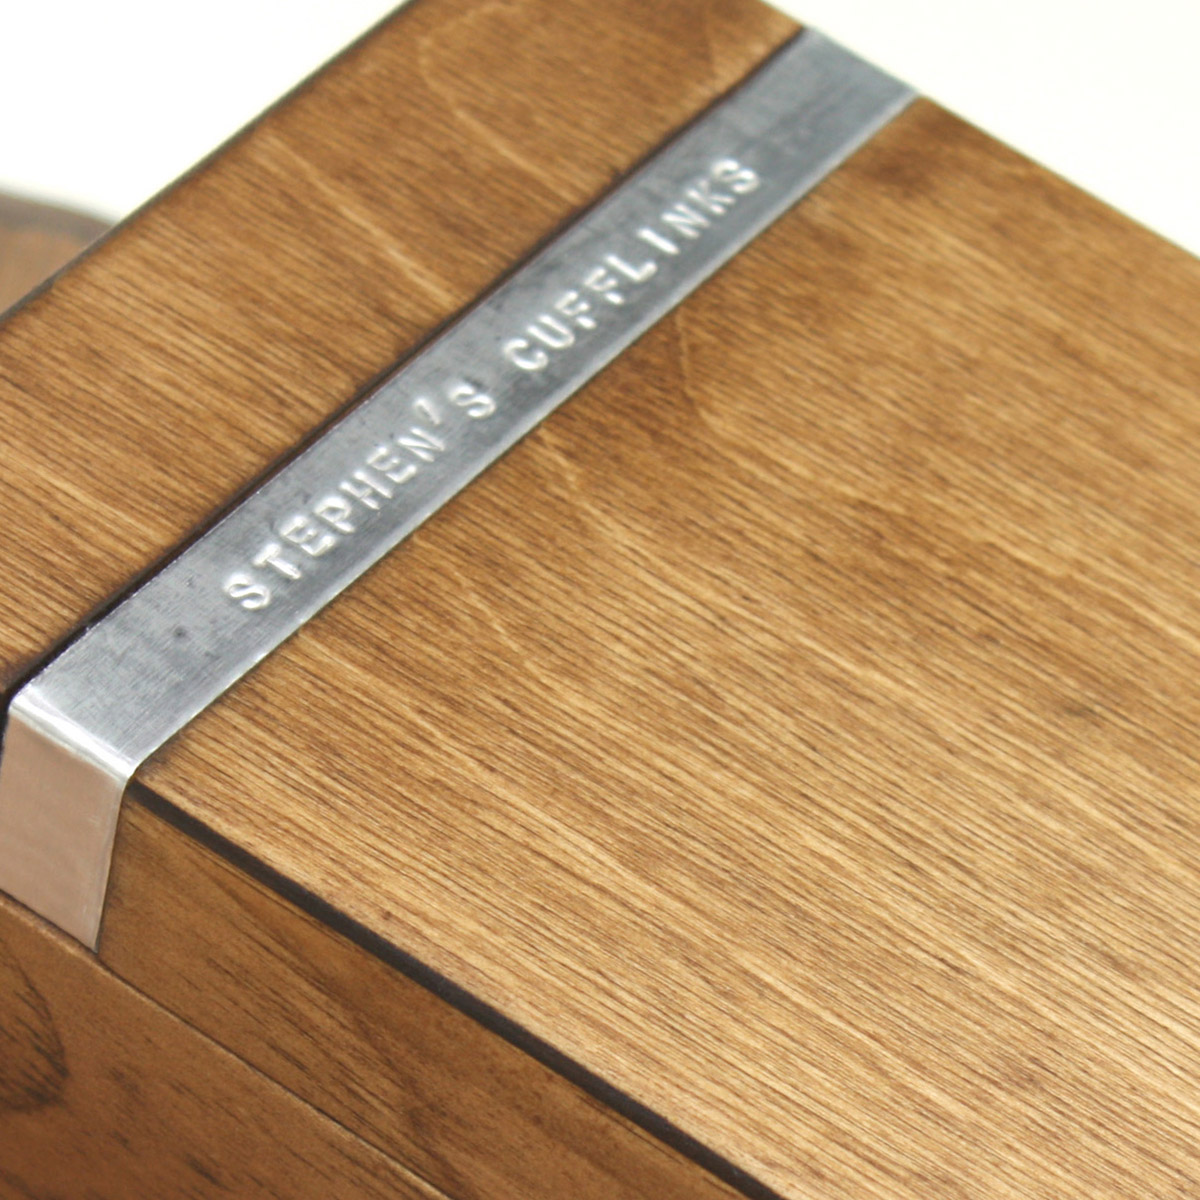 Personalised Wooden Cufflink Box - Message